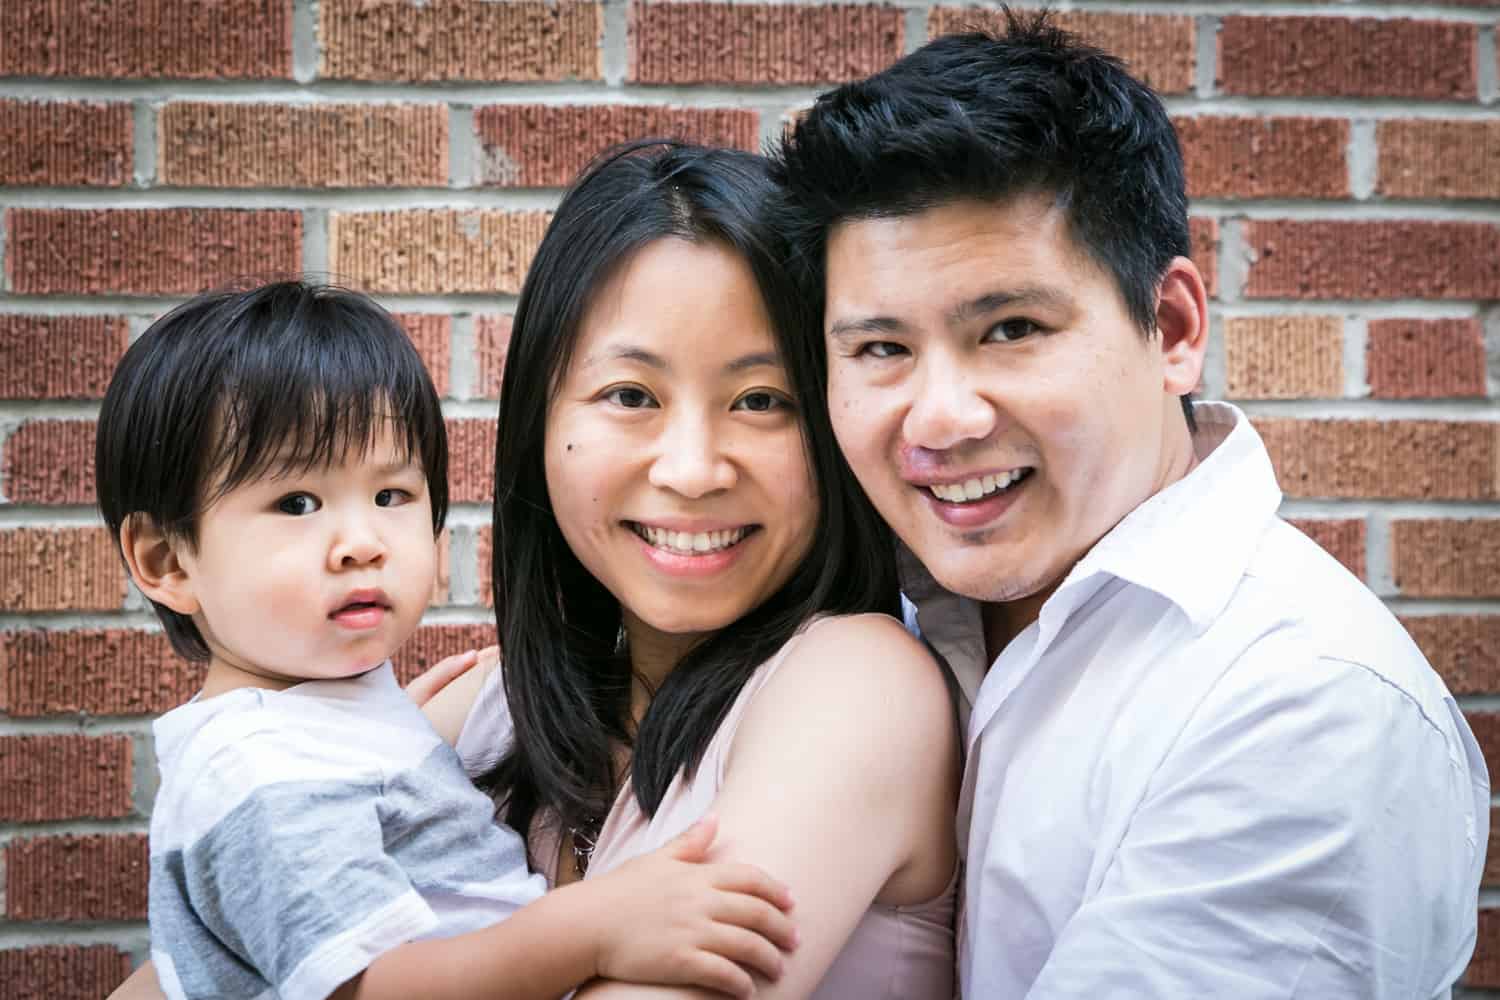 Manhattan family portrait of parents and little boy in front of brick wall